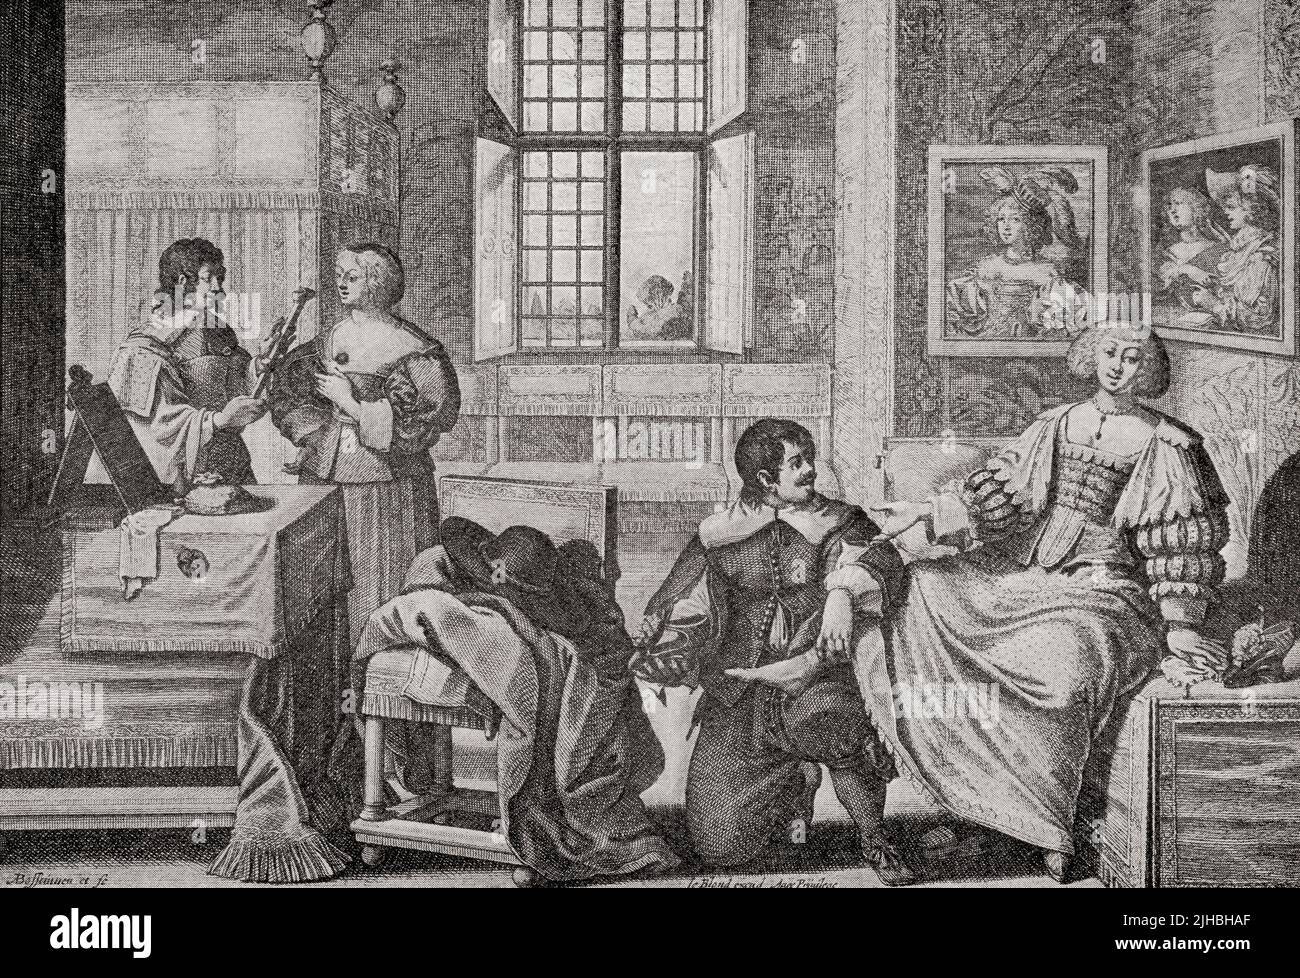 A 17th century shoemaker.  Afte the etching by Abraham Bosse.  From Modes and Manners, published 1935. Stock Photo